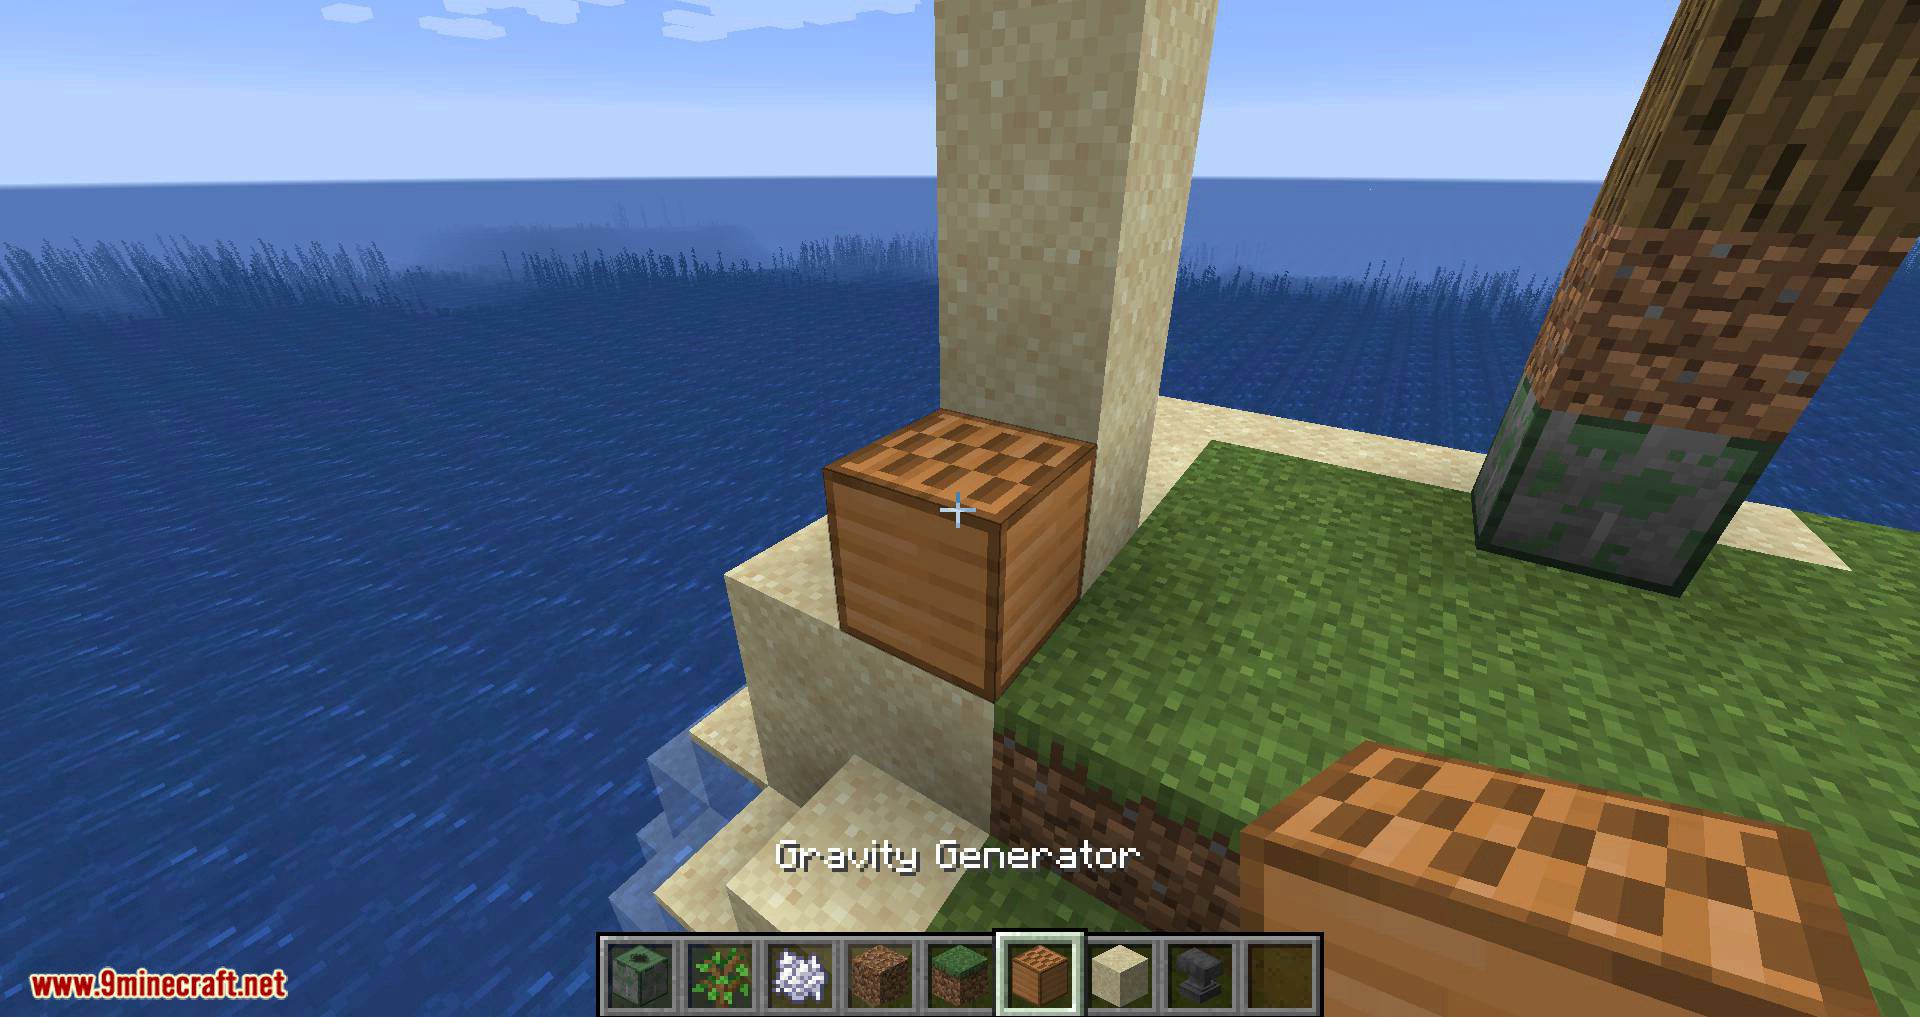 Quirky Generators mod for minecraft 01